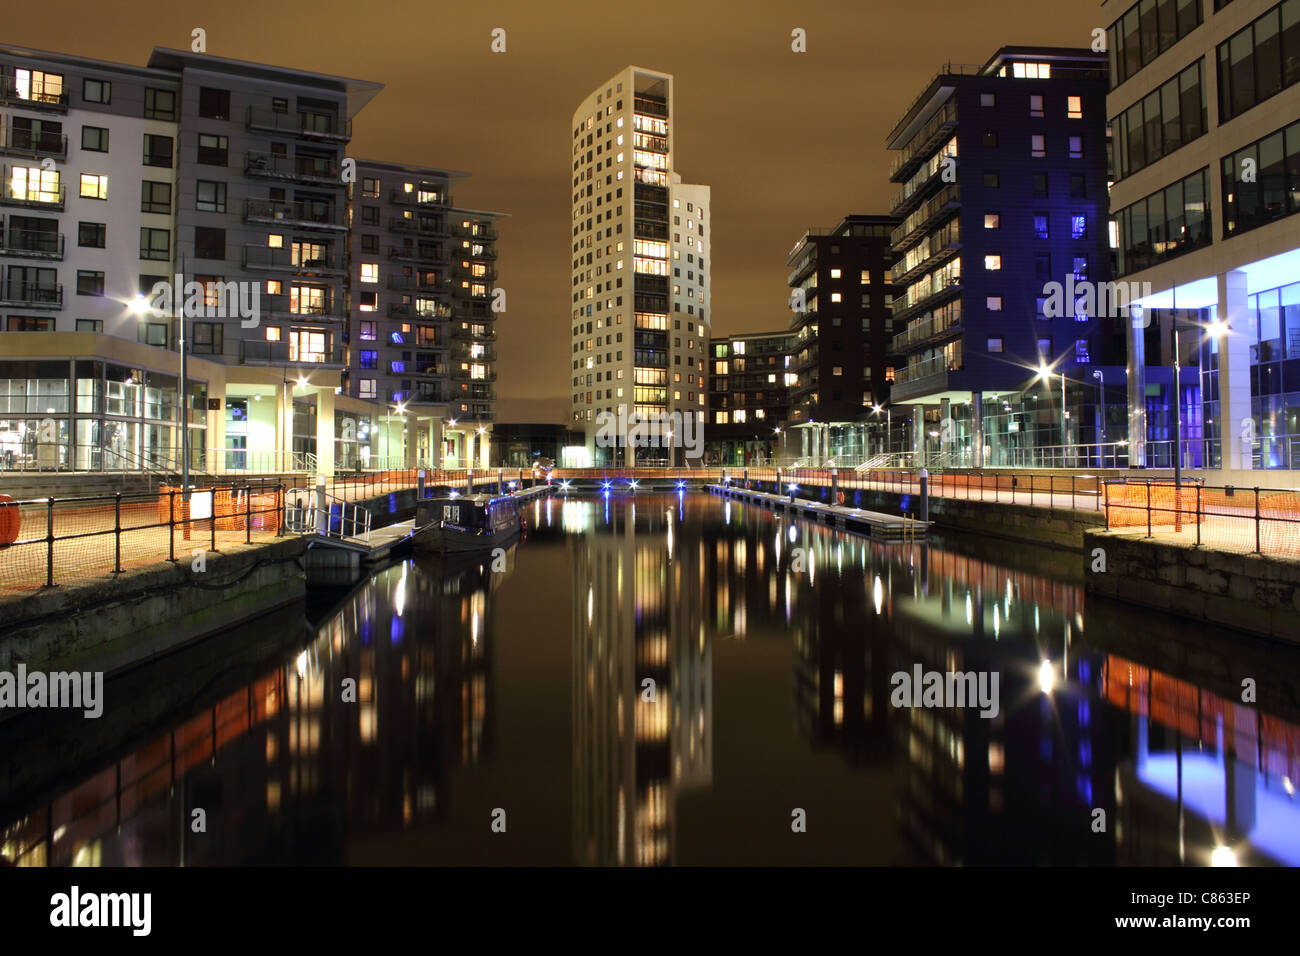 Clarence dock in leeds di notte Foto Stock